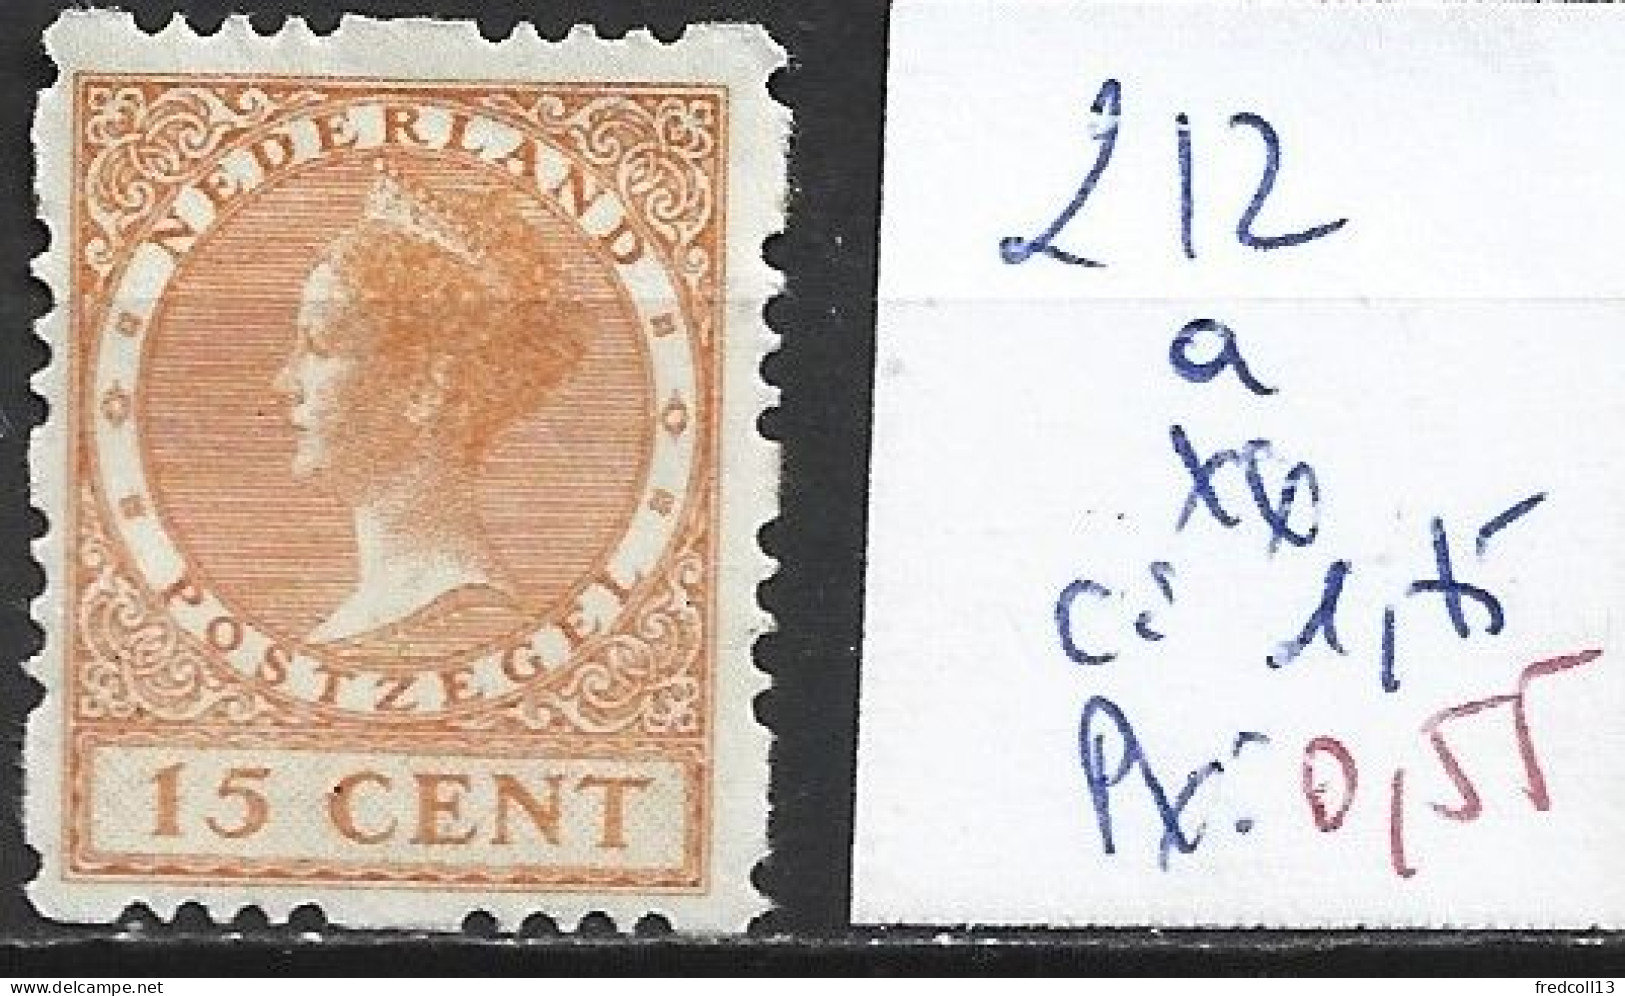 PAYS-BAS 212a ** Côte 1.75 € - Unused Stamps